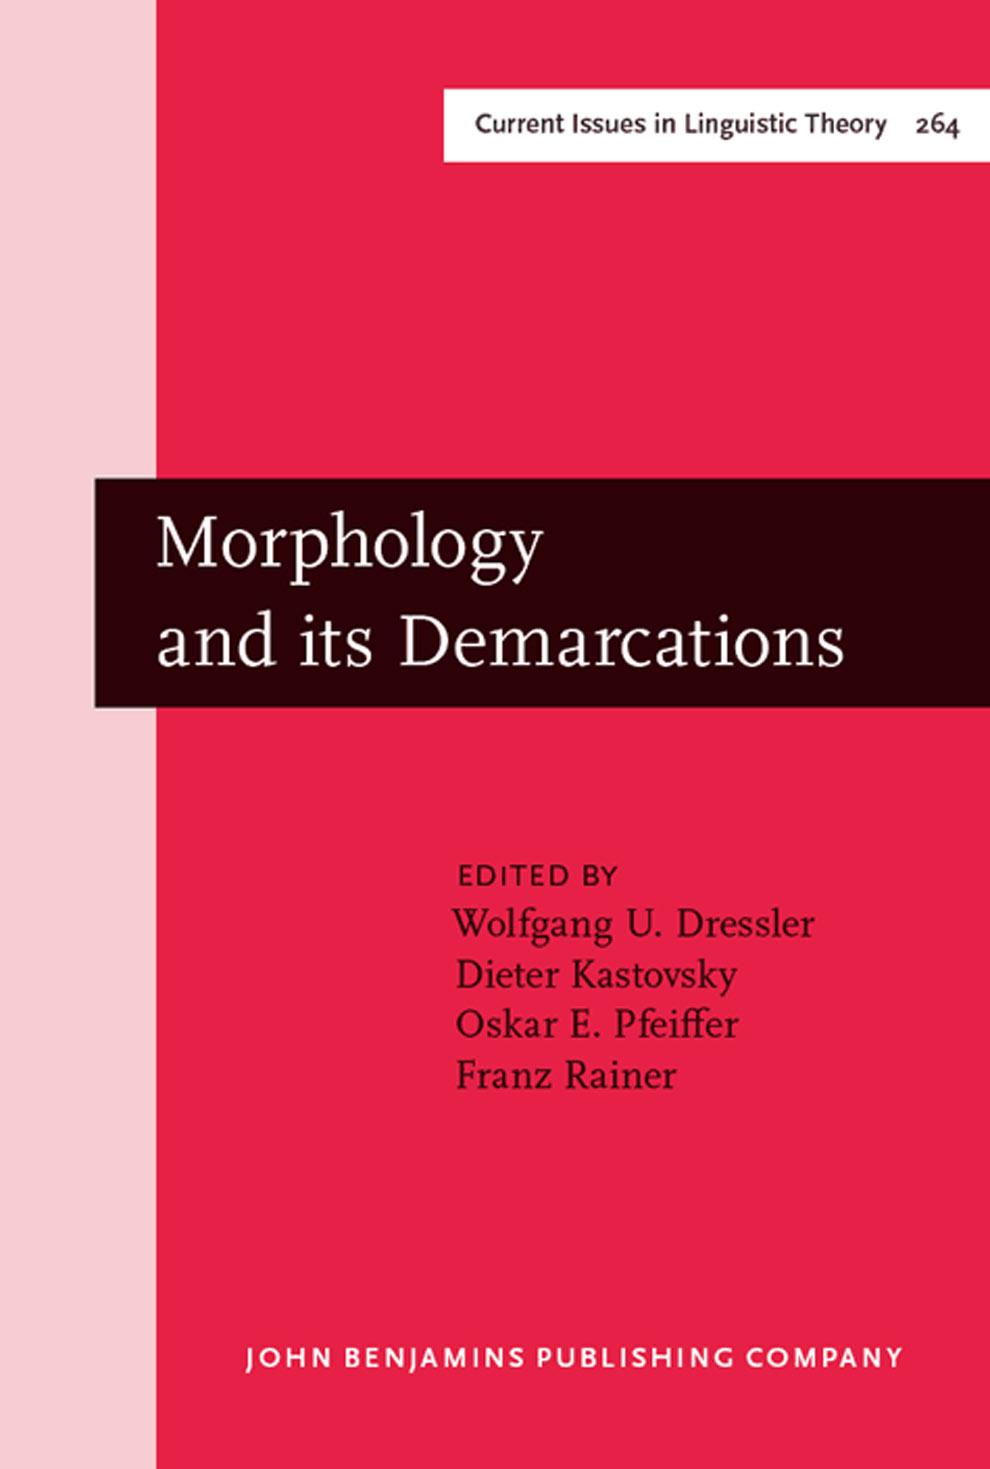 Morphology and Its Demarcations: Selected Papers From the 11th Morphology Meeting, Vienna, February 2004